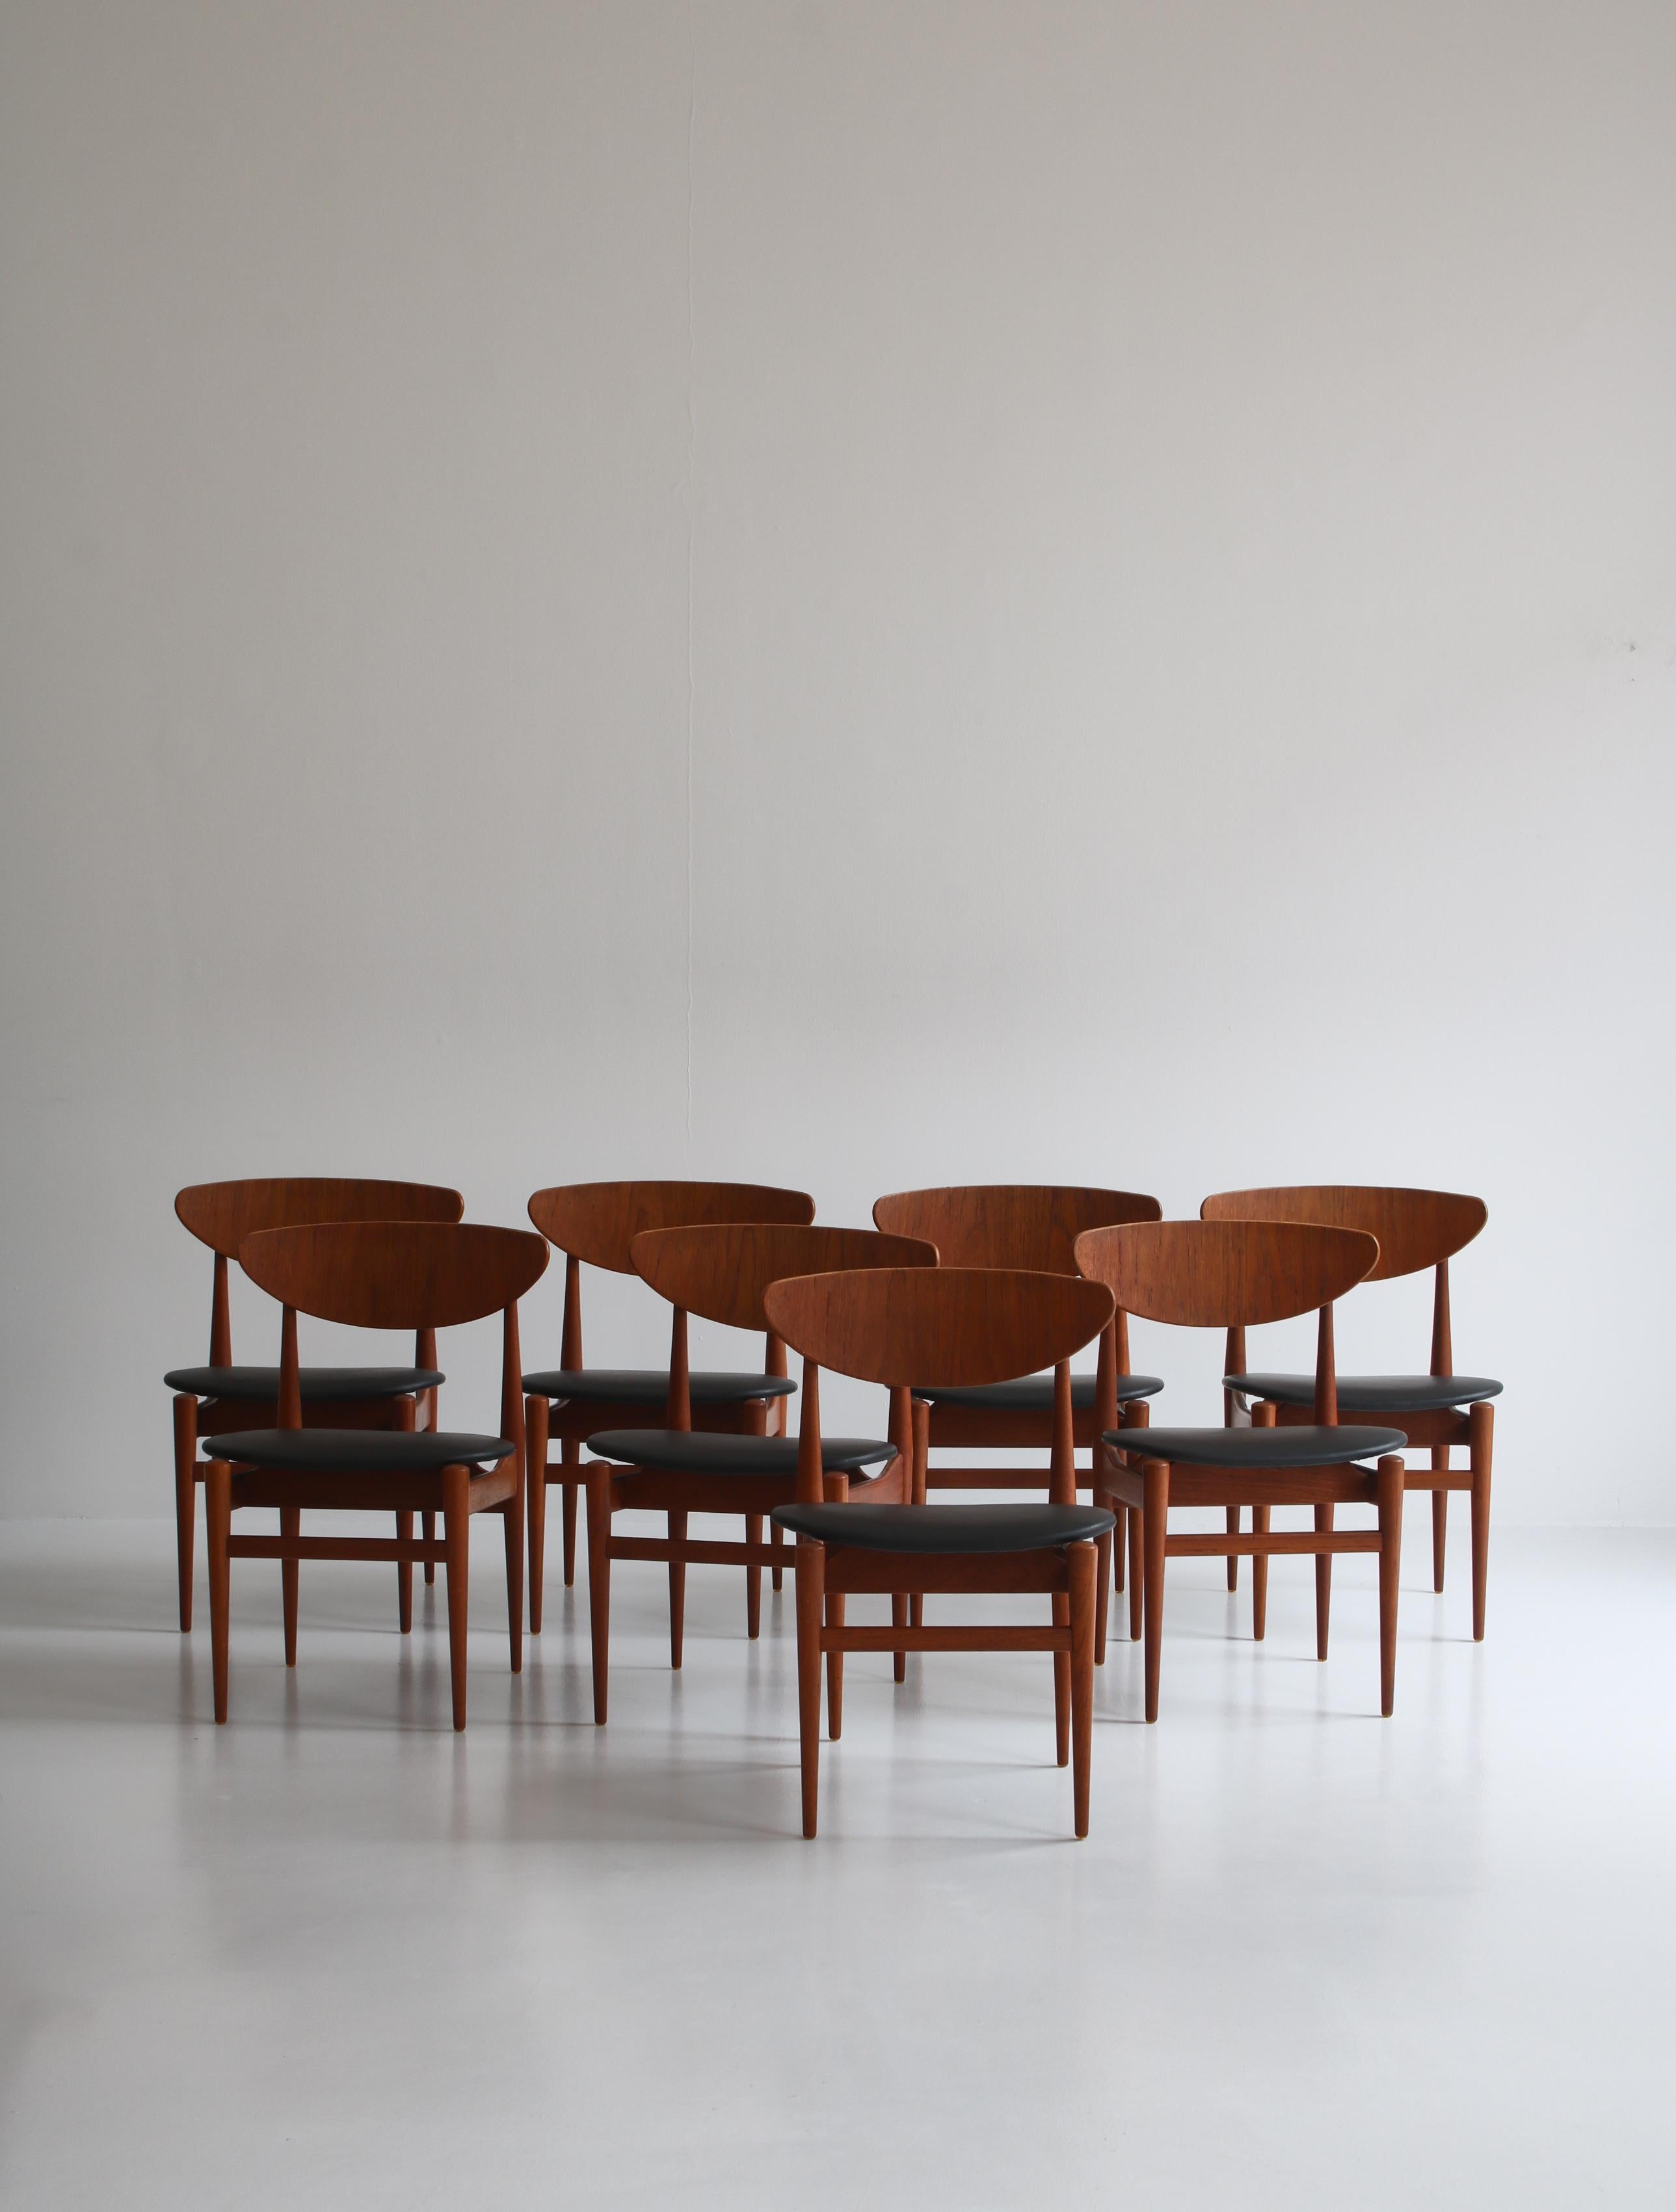 Rare and beautiful dining chairs made in 1963 for Sorø Stolefabrik, Denmark by Italian/Danish designer couple Inge & Luciano Rubino. The chairs features stunning details in teakwood and newly upholstered seats in black aniline leather.